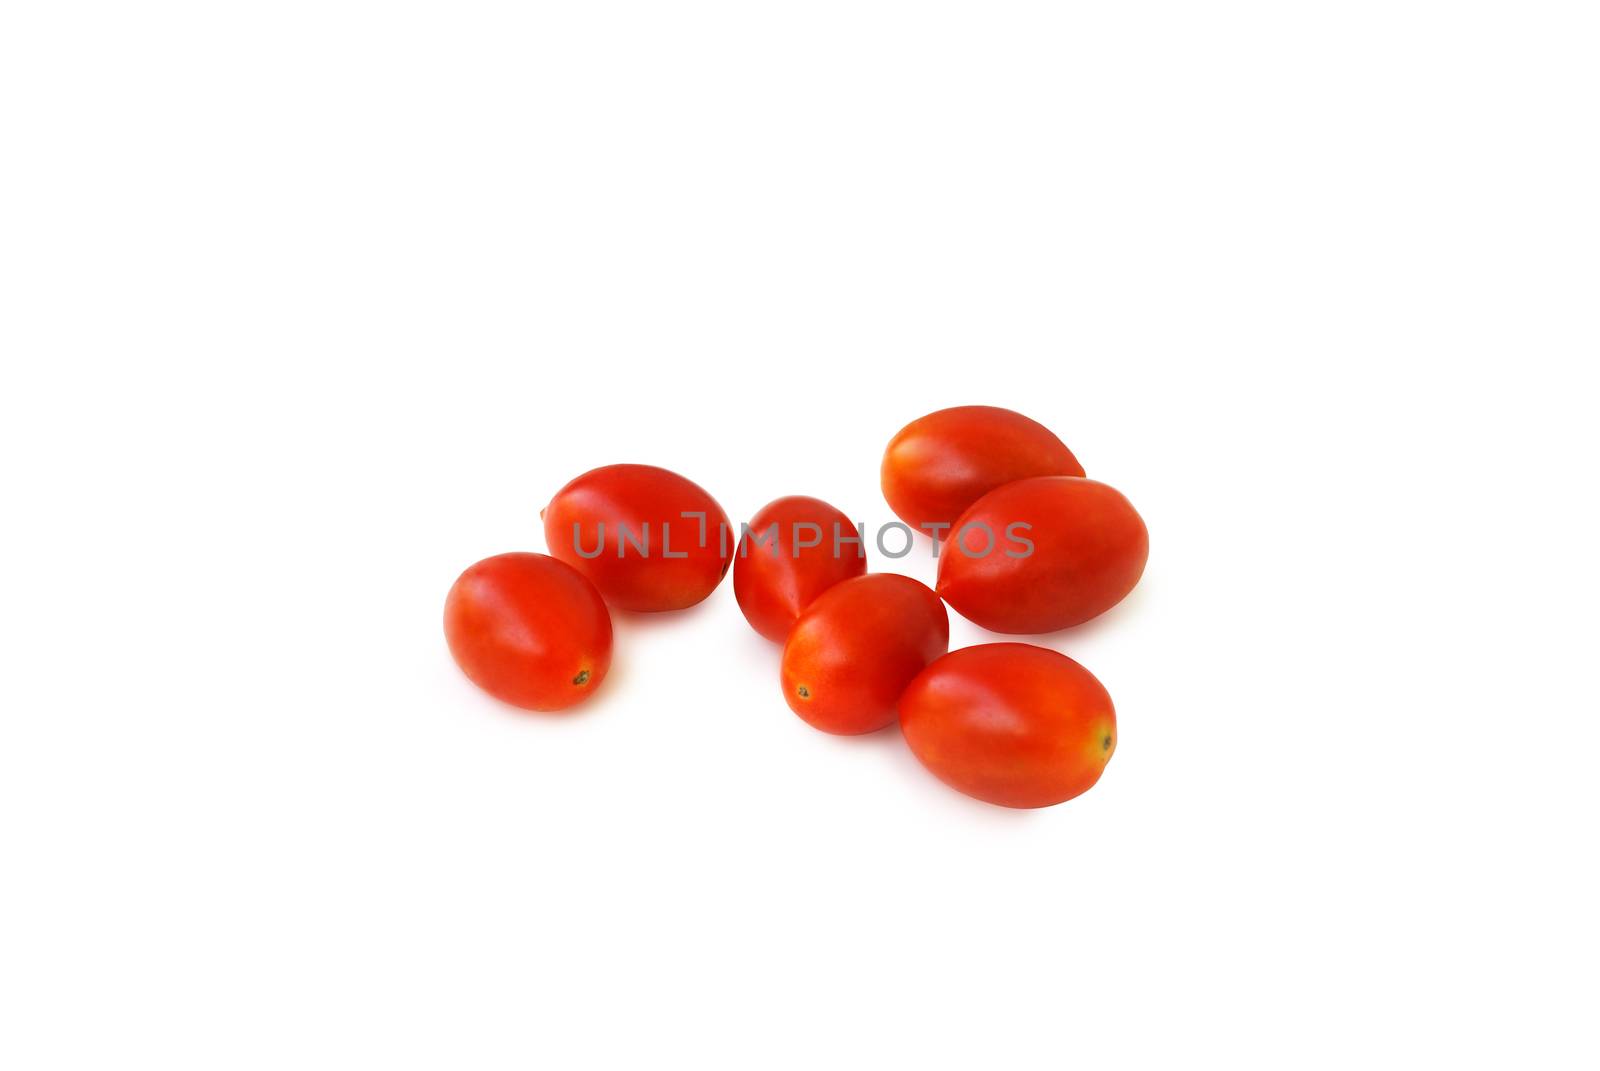 Cherry Tomatoes on white background.Lycopersicon esculentum Mill.Helps the body to fight asthma up to 45%.Help prevent dementia or Alzheimer's disease.With Clipping Path